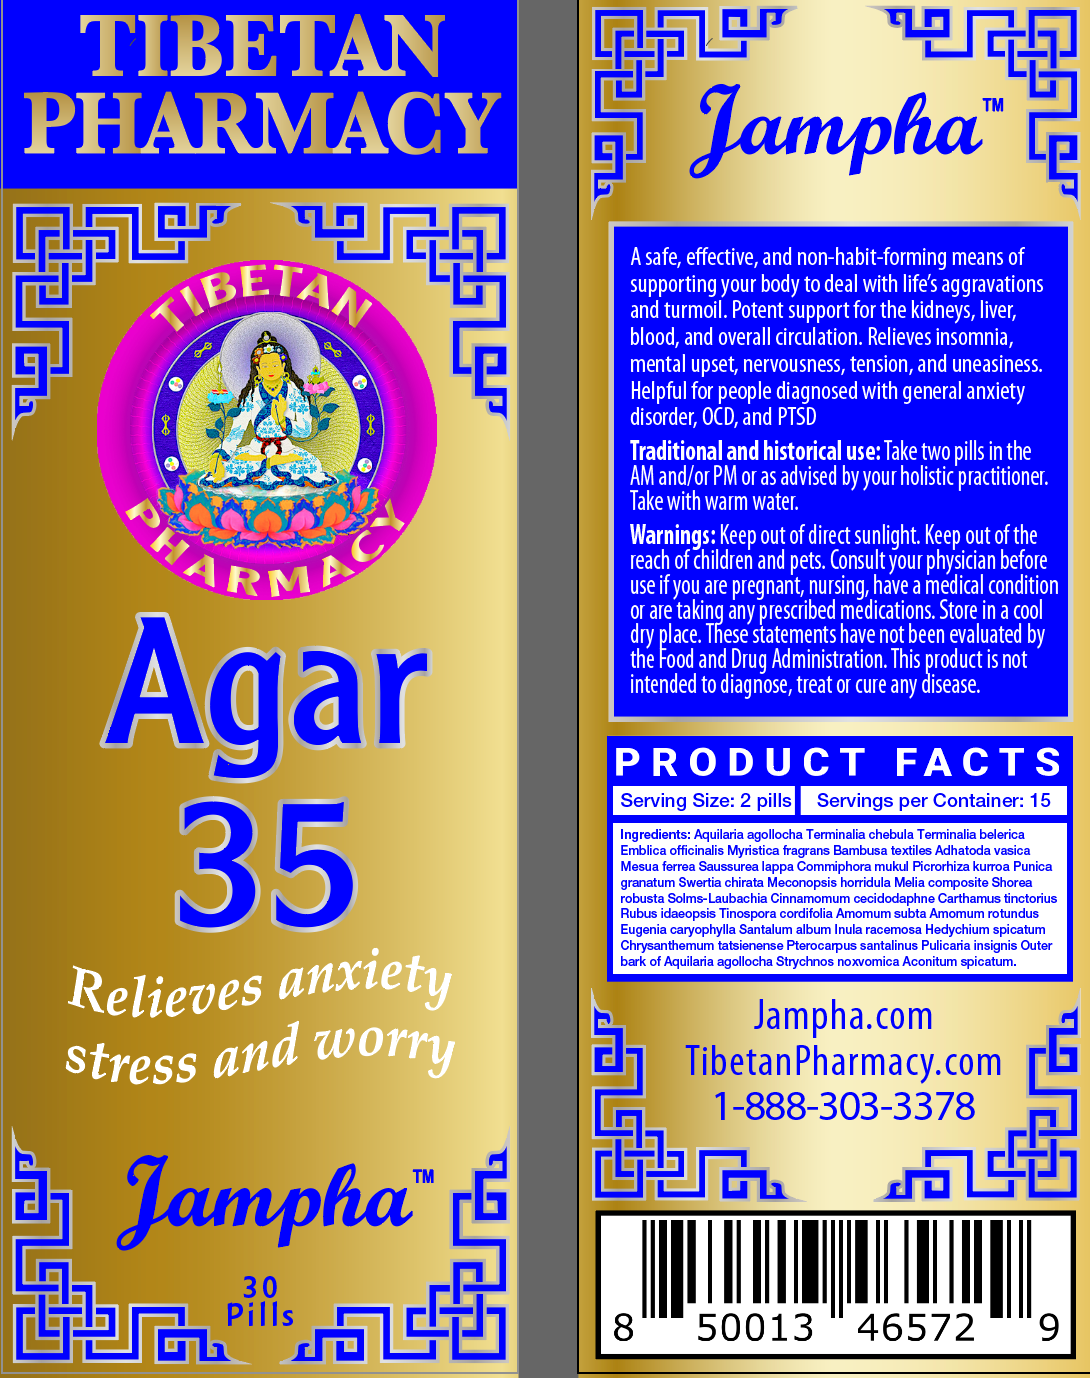 Agar 35 | Relieve Anxiety, Stress, and Worry